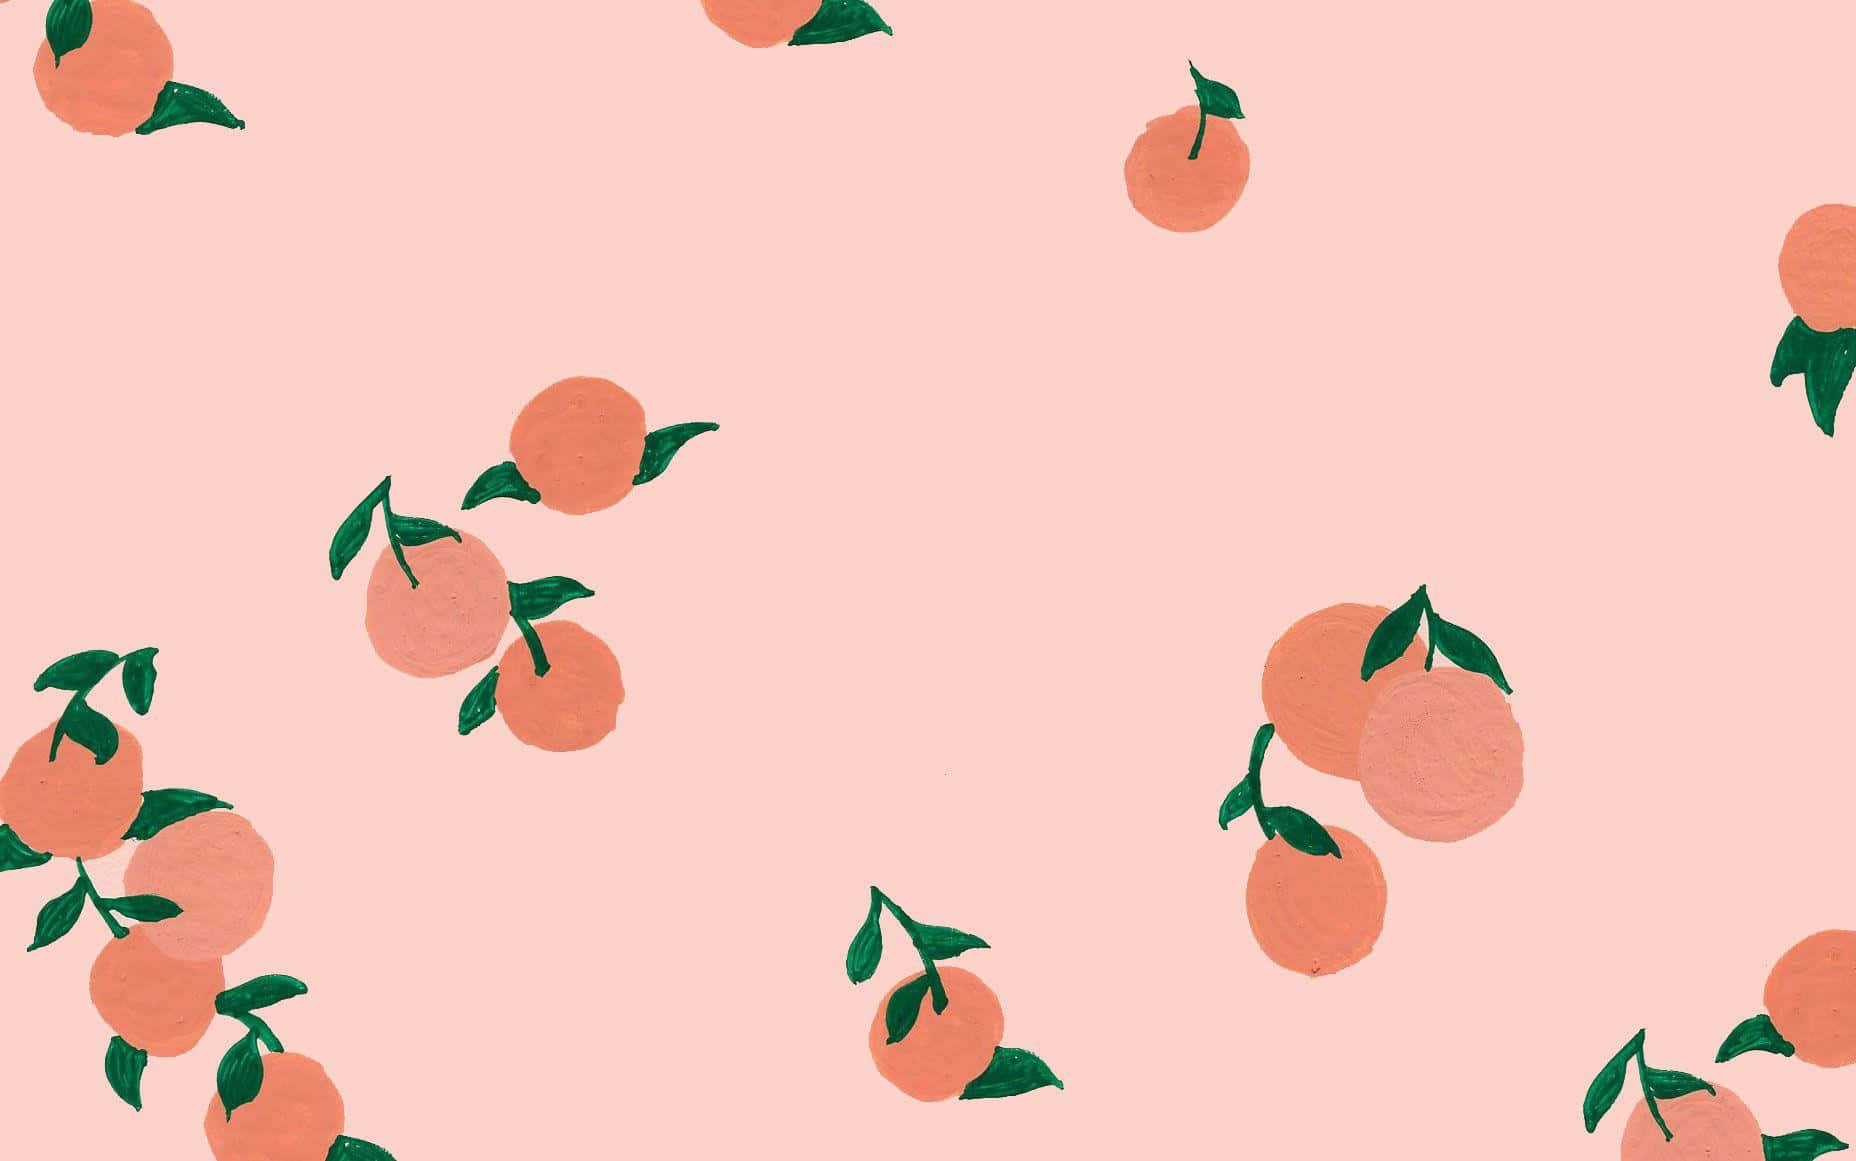 A Pink Background With Oranges On It Wallpaper